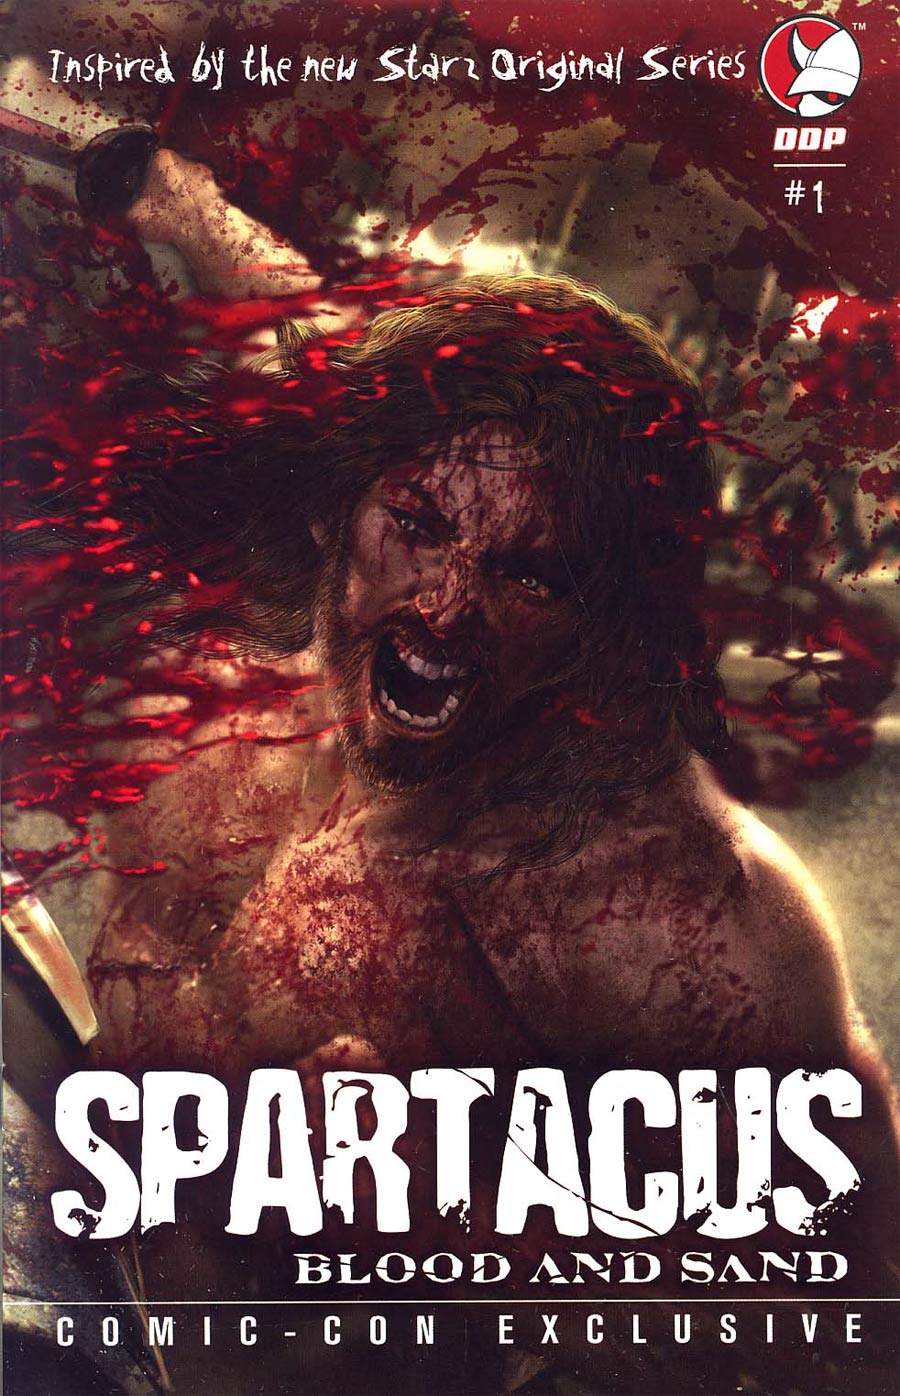 Spartacus Blood And Sand #1 Cover B Comic Con